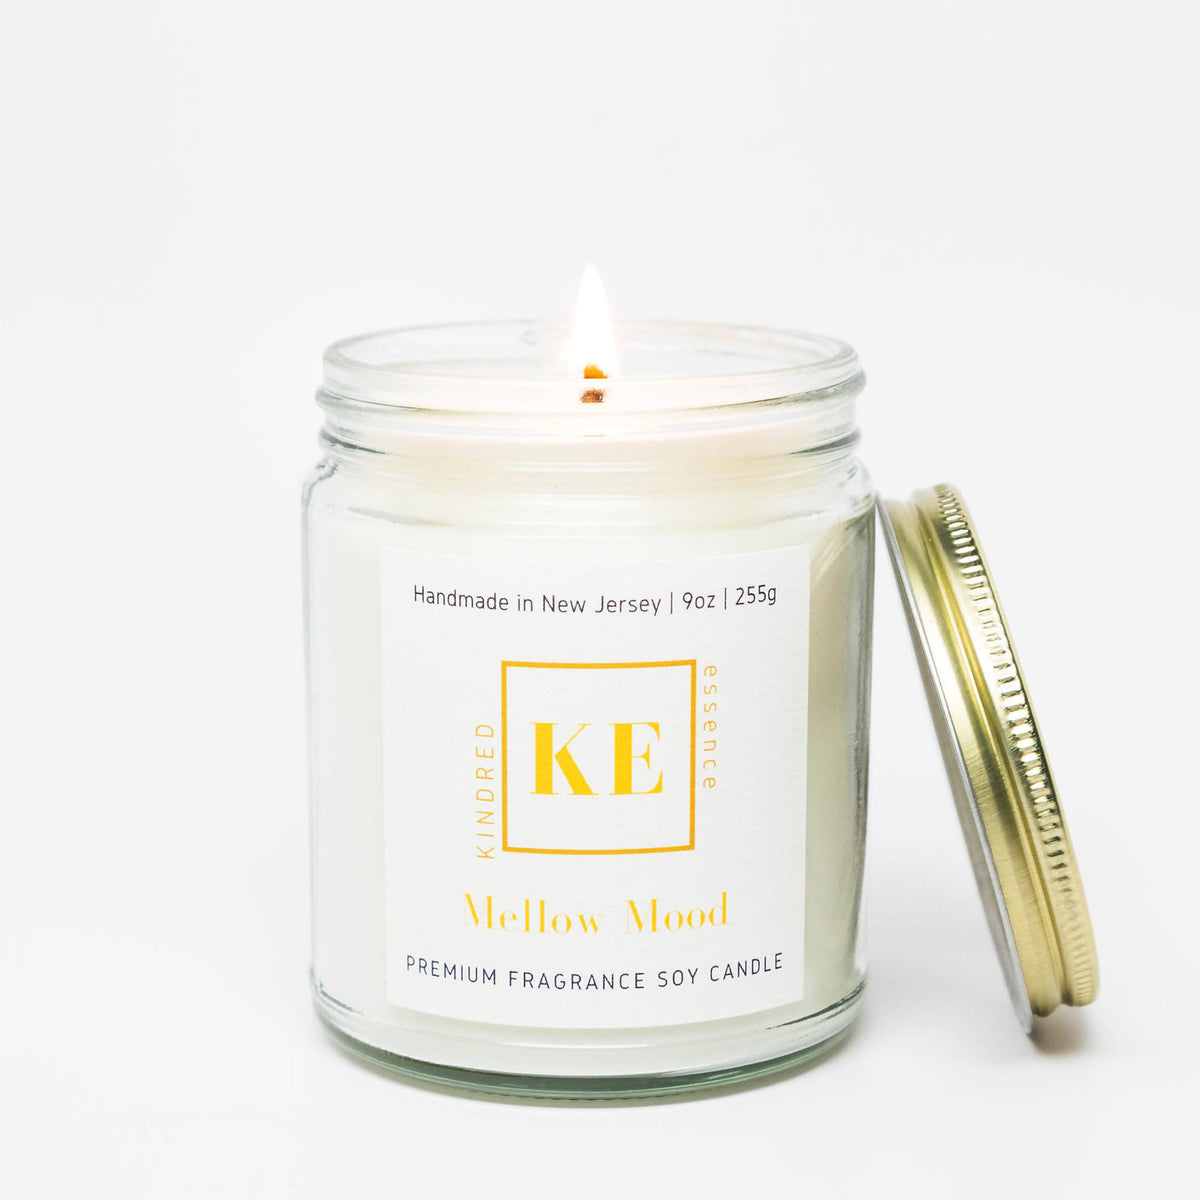 Kindred Essence Mellow Mood Premium Fragrance Soy Candle - Handmade